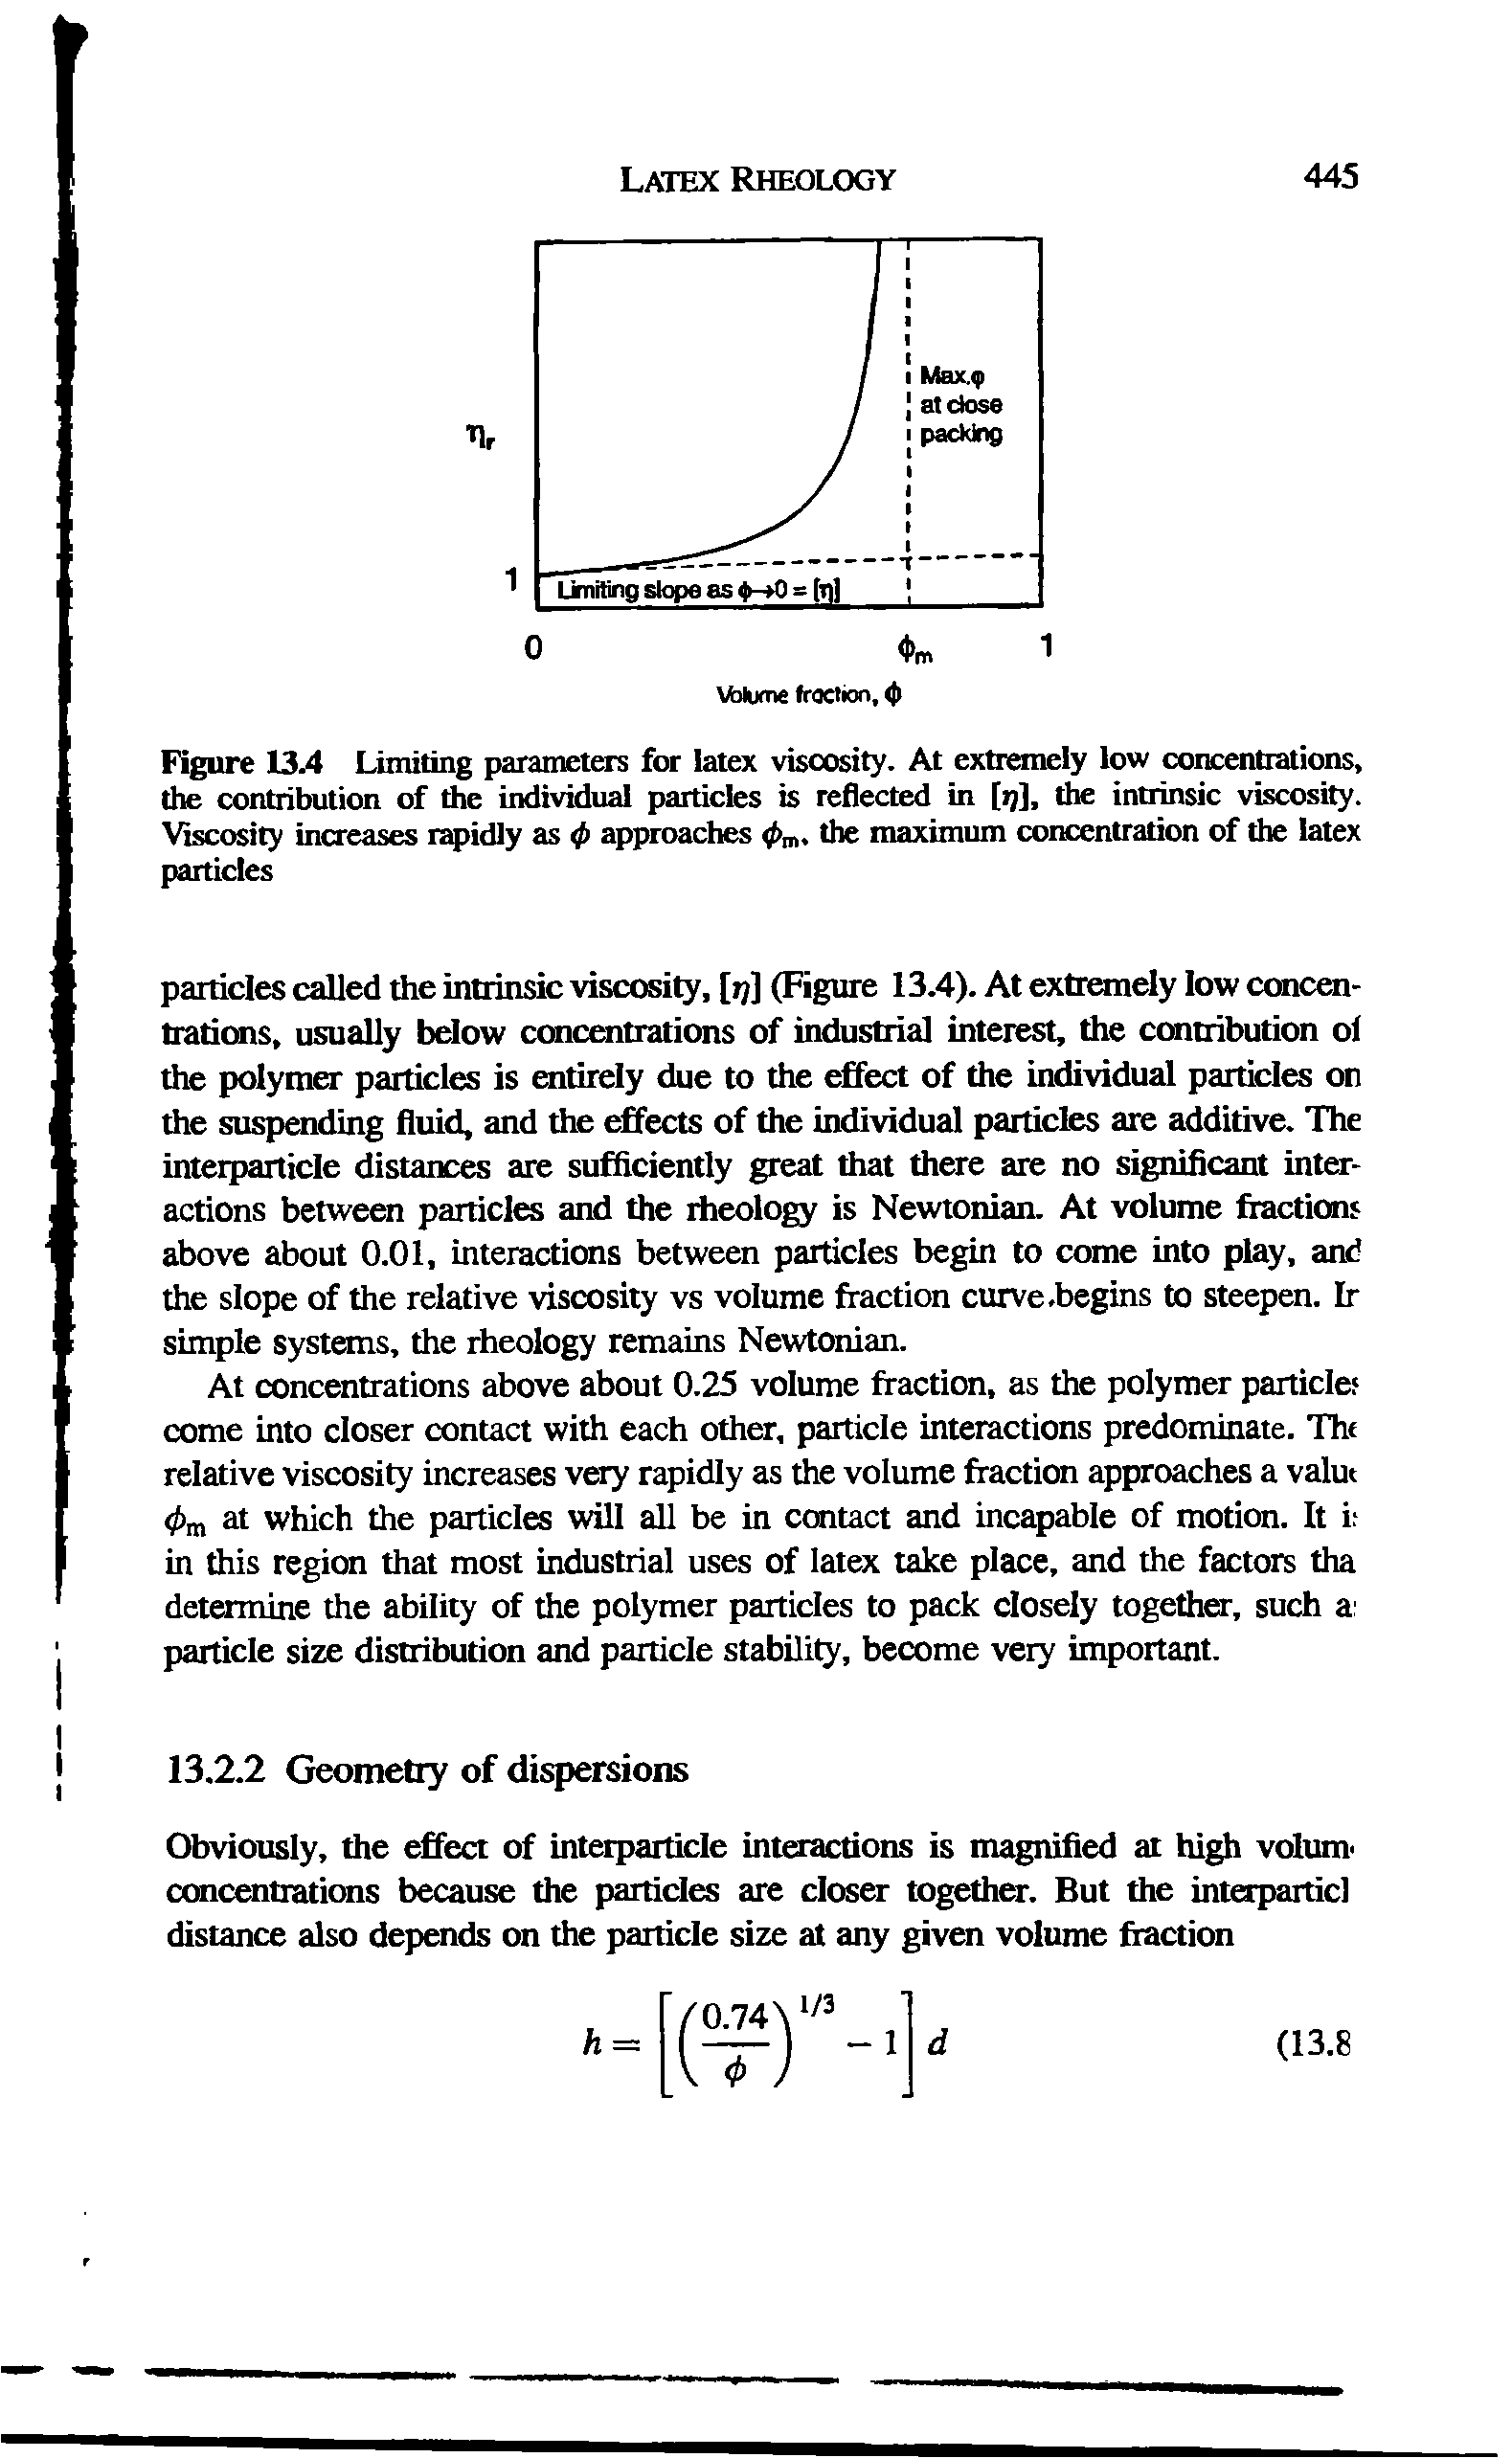 Figure 13A Limiting parameters for latex viscosity. At extremely low concentrations, the contribution of the individual particles is reflected in [ij], the intrinsic viscosity. Viscosity increases r idly as (p approaches the maximum concentration of the latex particles...